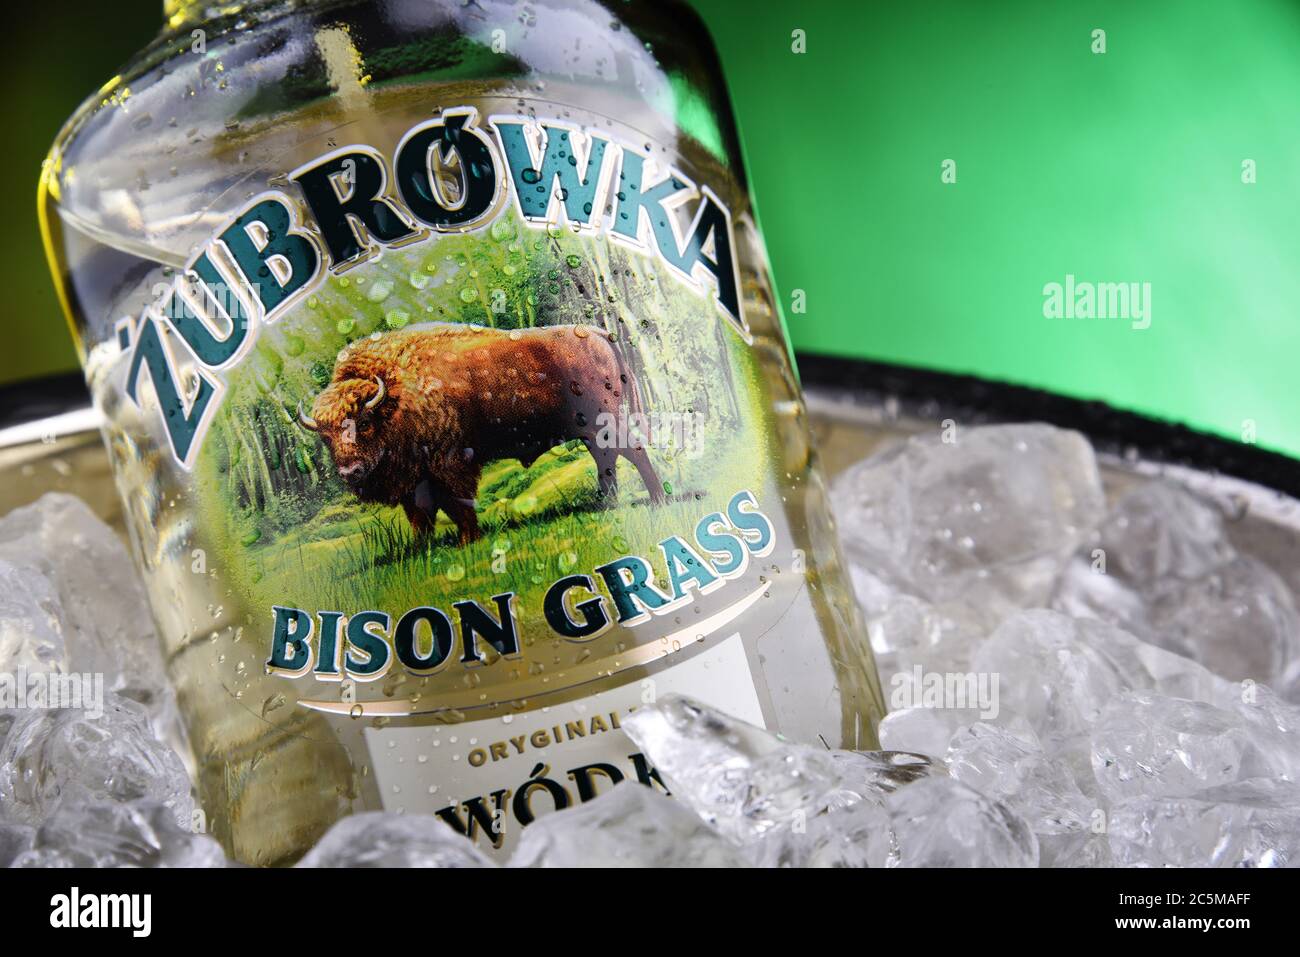 POZNAN, POLAND - JAN 3, 2020: Bottle of Zubrowka also known in English as Bison Grass Vodka, a dry, herb-flavoured vodka distilled from rye and manufa Stock Photo